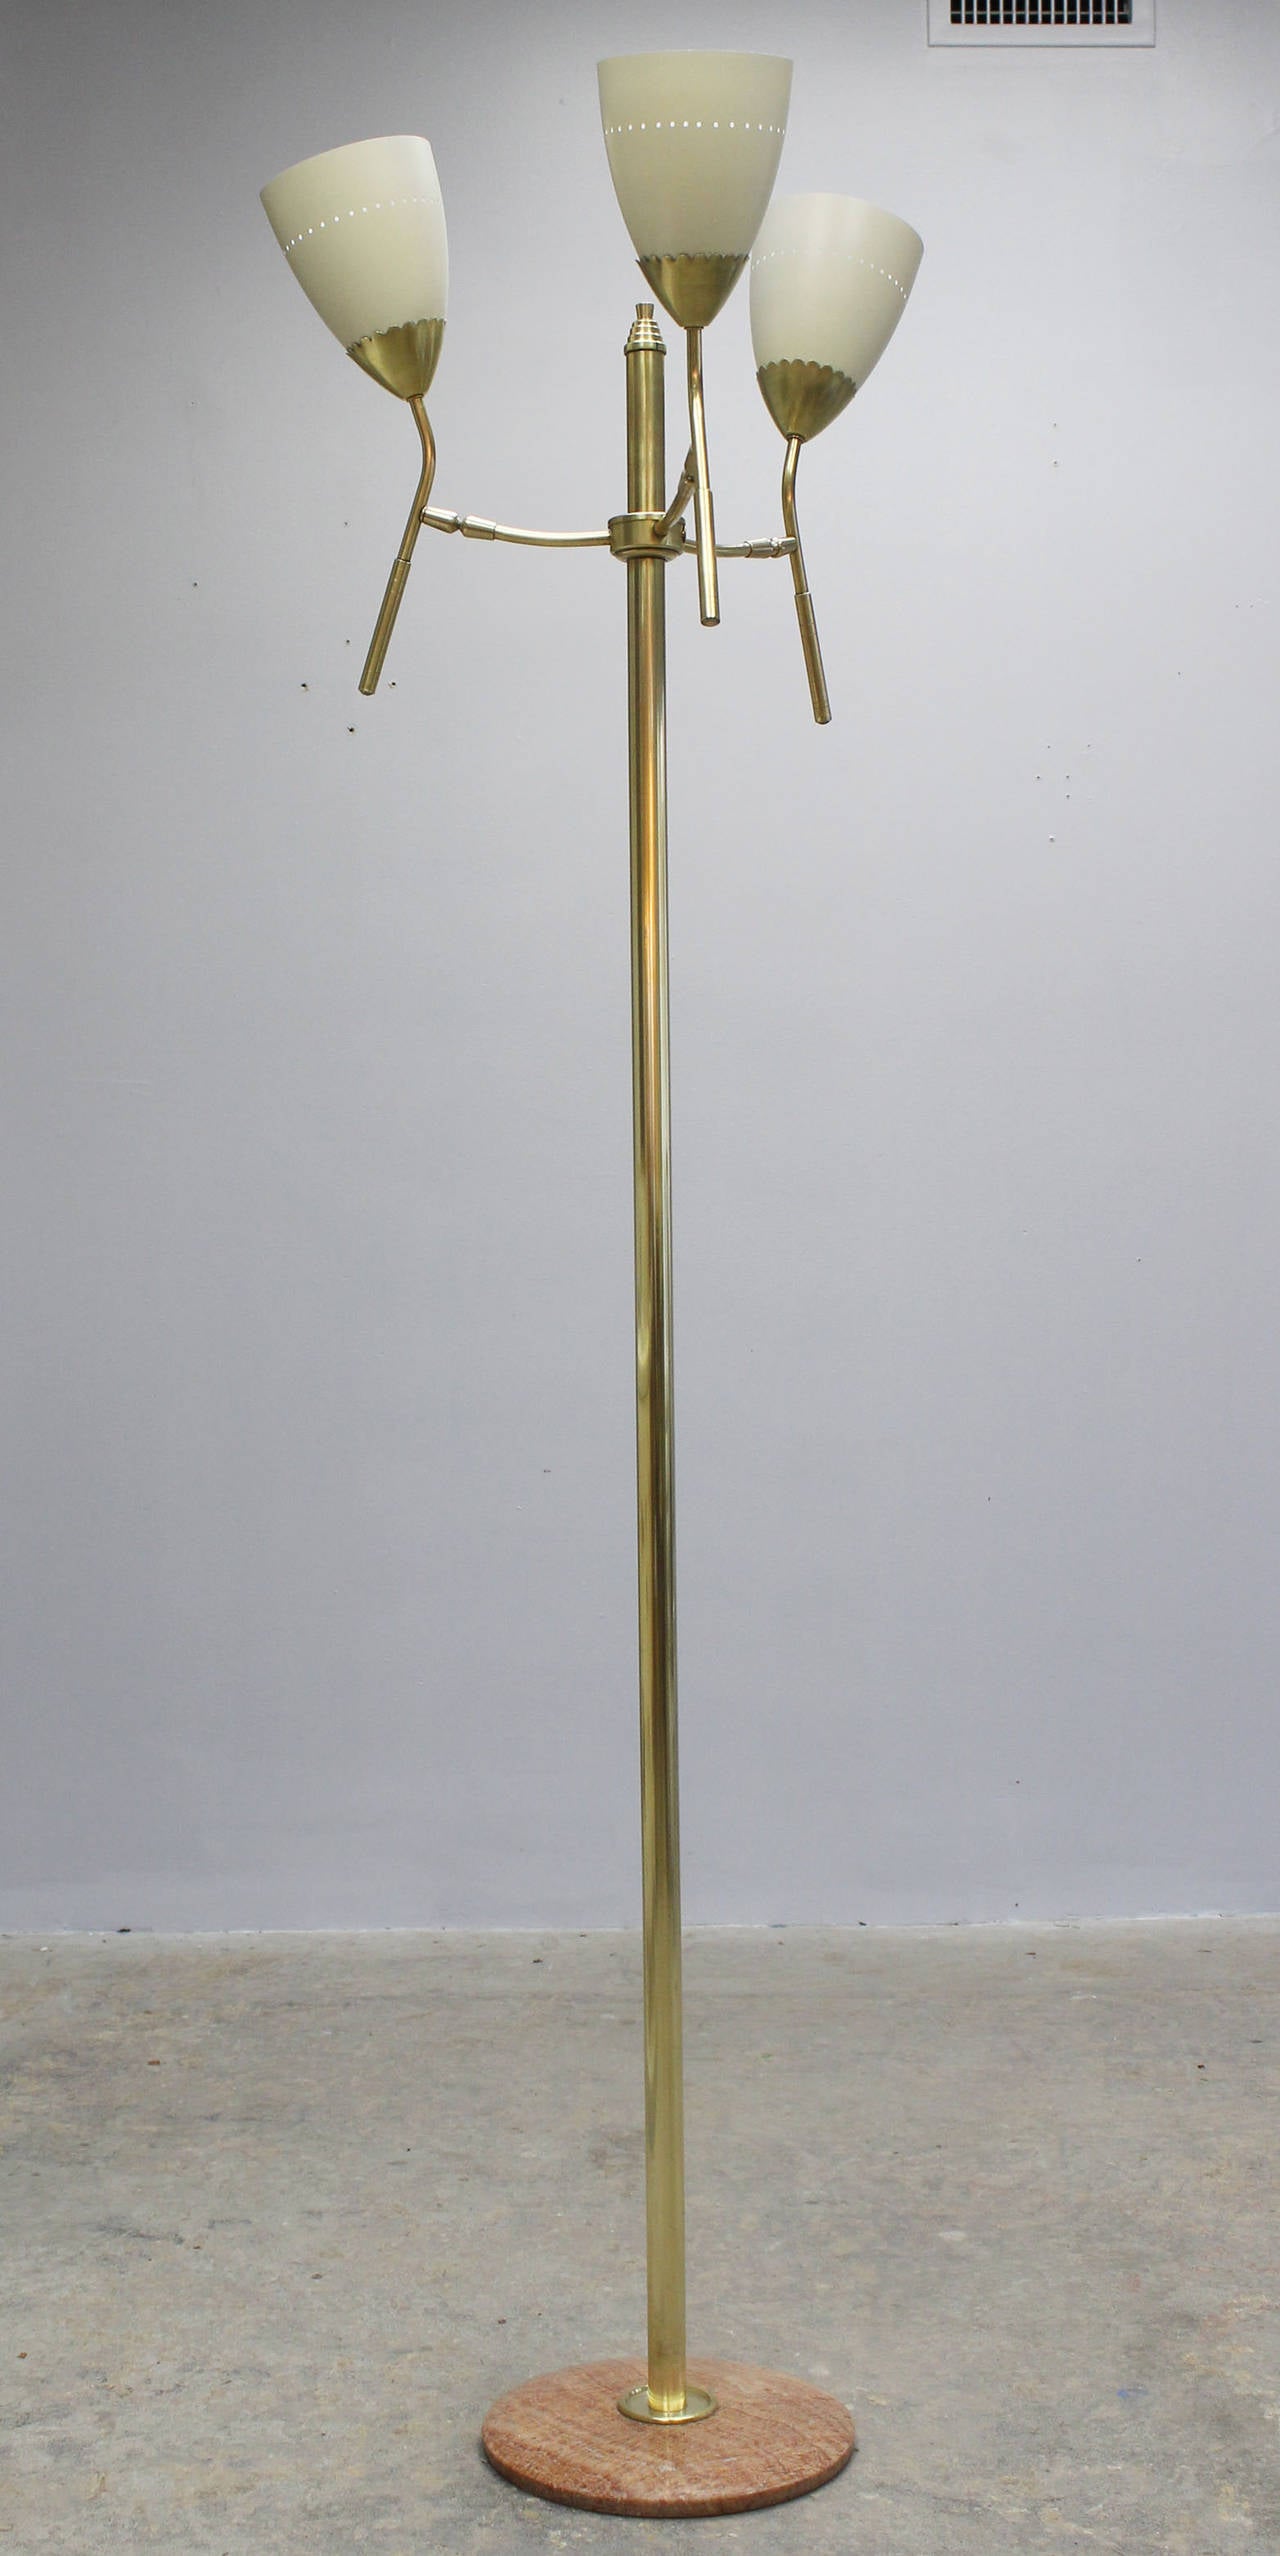 An Italian three-head brass floor lamp with 12 inch marble base and enameled metal shades, in the manner of Arredoluce.